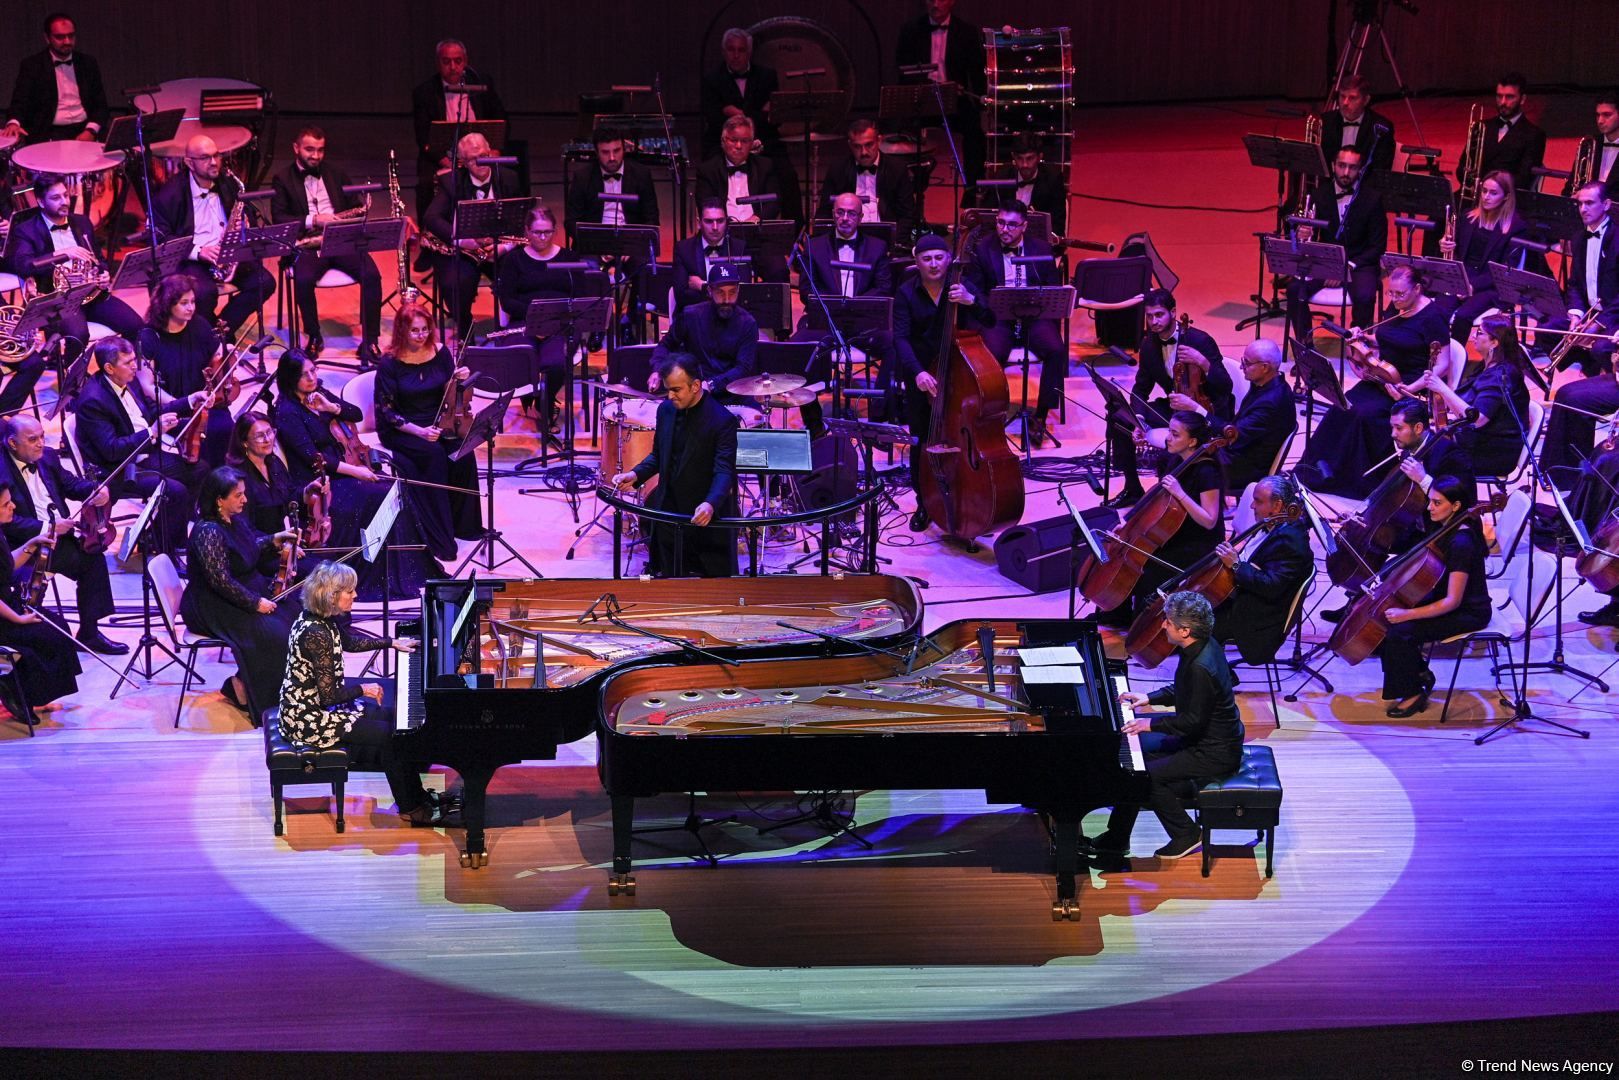 Breathtaking Baku Int'l Piano Festival opens its doors to most discerning music lovers [PHOTOS]